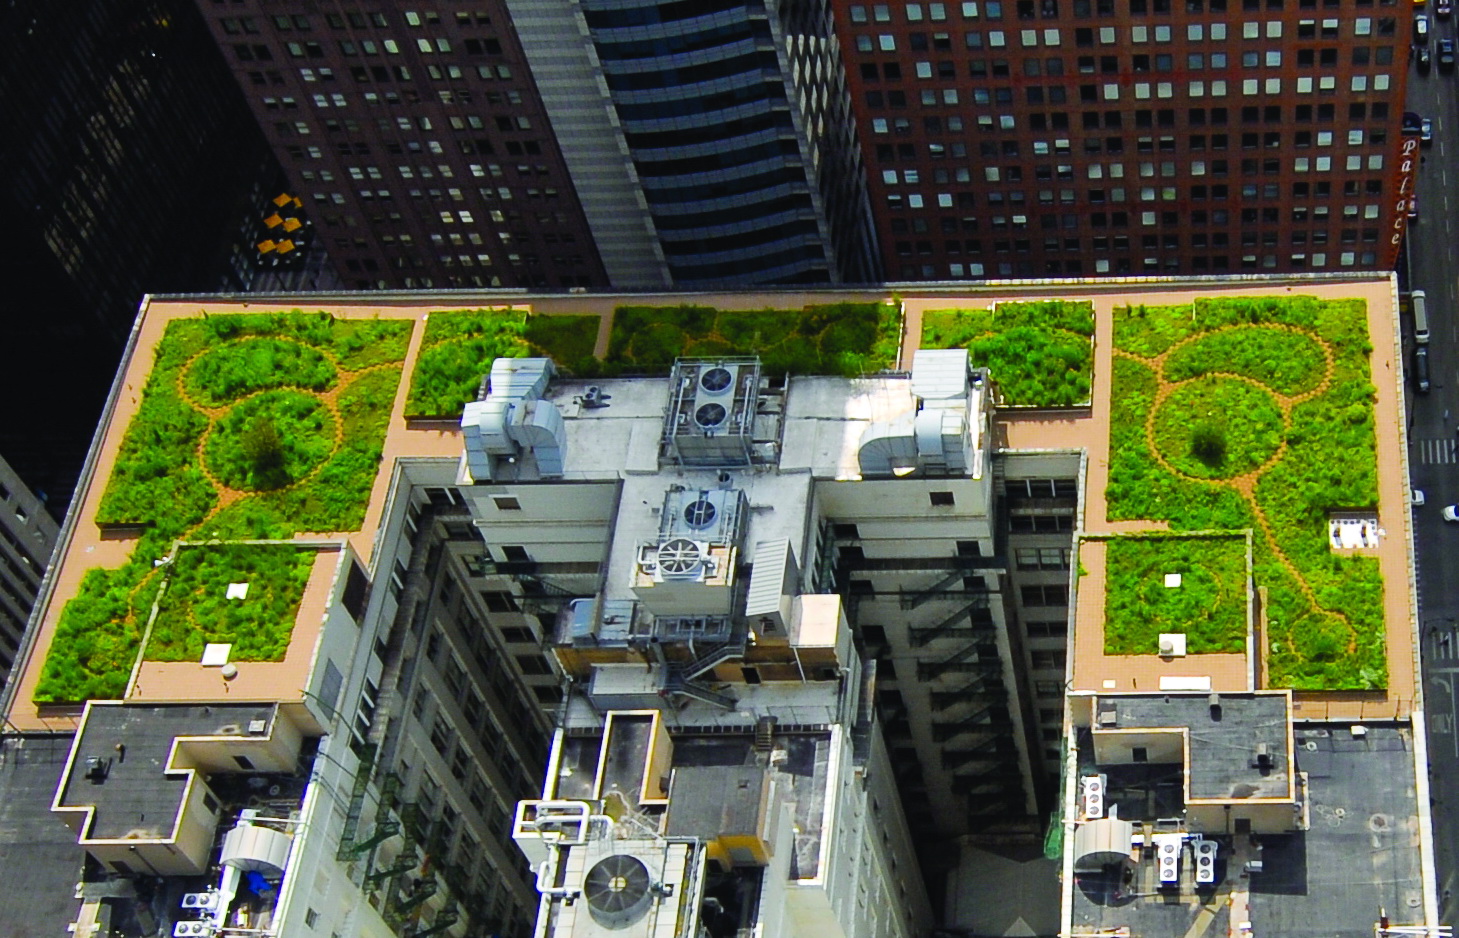 Chicago City Hall green roof (Source: http://aasid.parsons.edu/decorationascomposition/sites/default/files/001-cityhall-roof1_0.jpg)